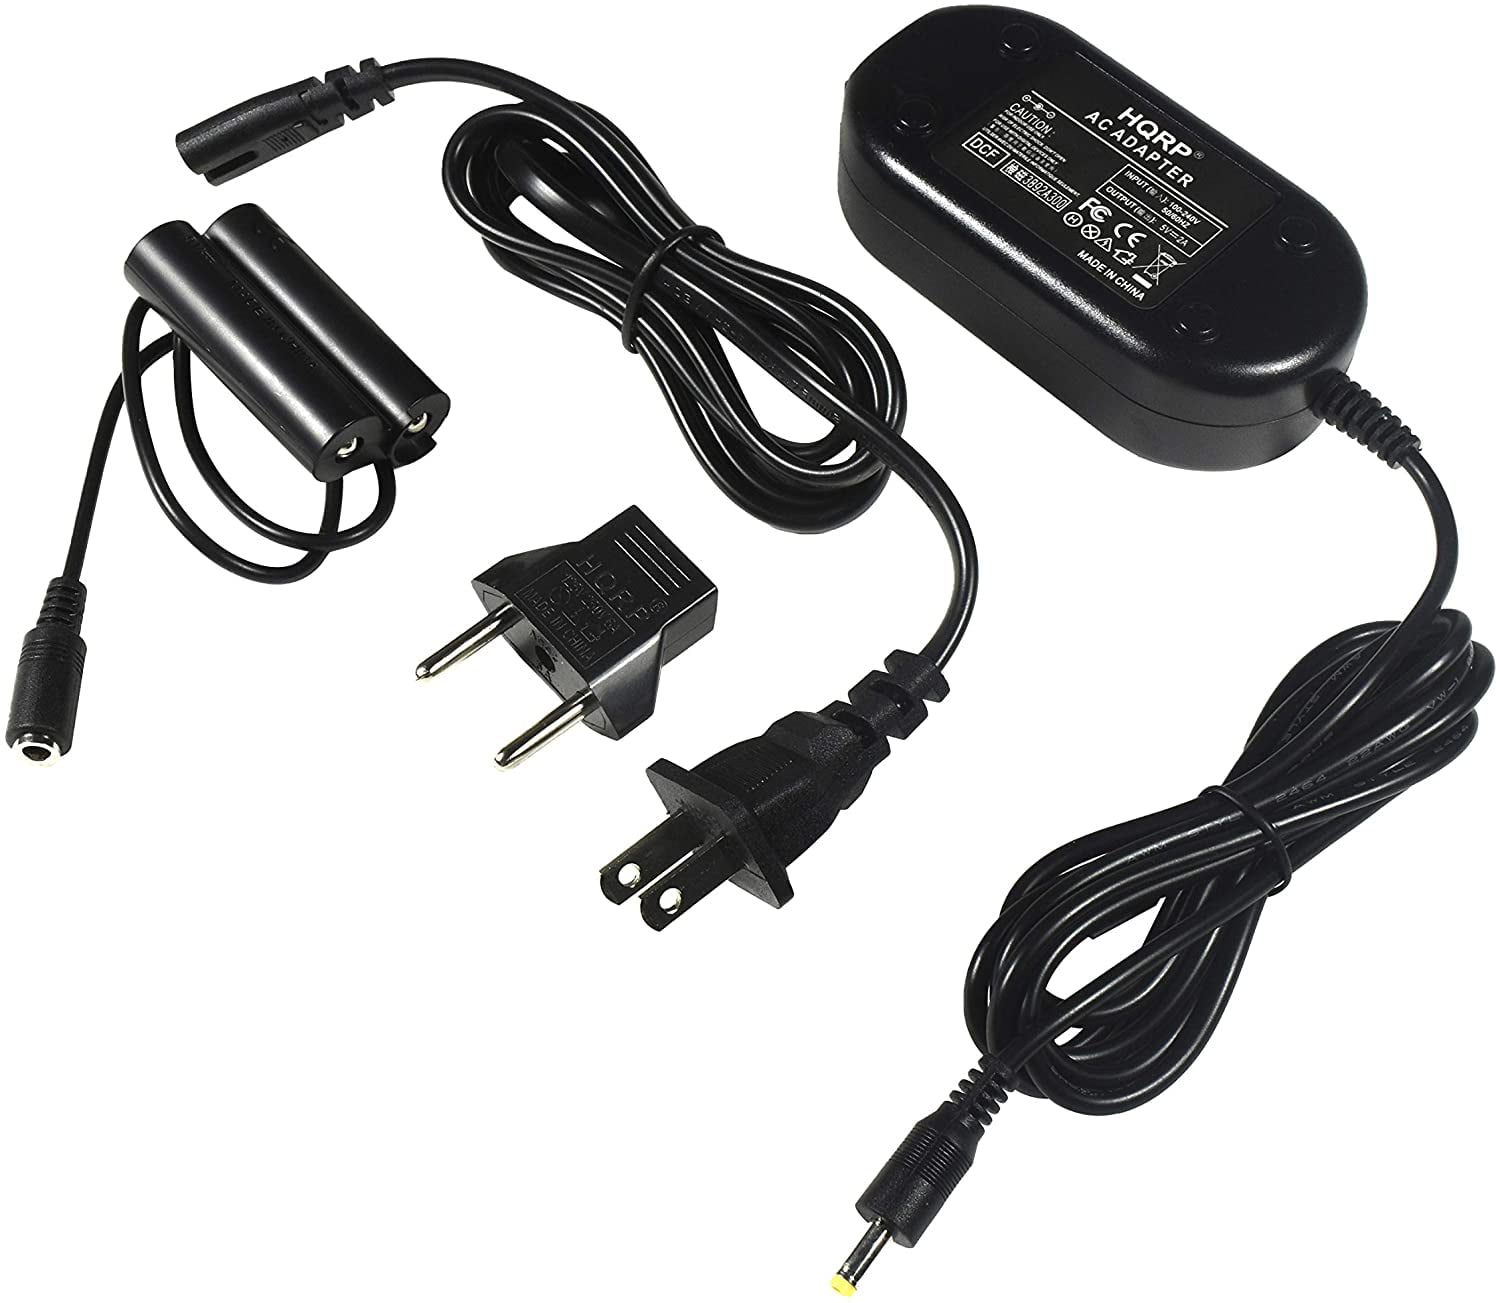 HQRP Kit AC Power Adapter and DC for Fuji Fujifilm Finepix S2800HD, S2900, S2940, S2950, S2980, S2990, S3200, S4200, S4250, S4300, S4400, S4500, S4500HD Digital Camera plus Euro Plug Adapter -